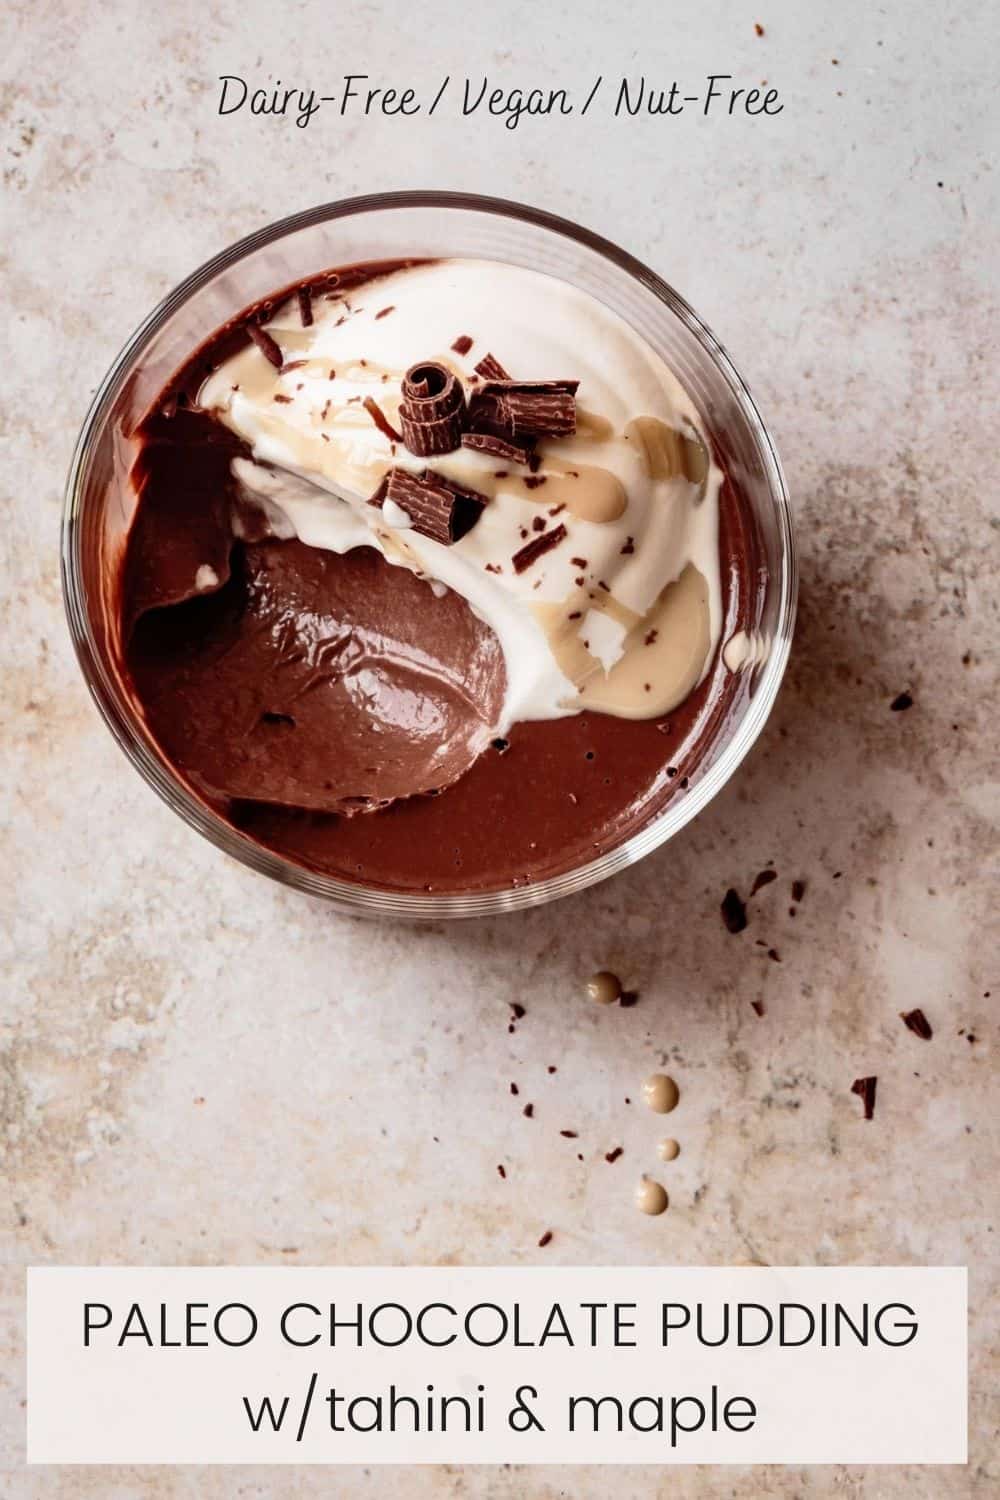 paleo chocolate pudding recipe in a glass, with text overlay